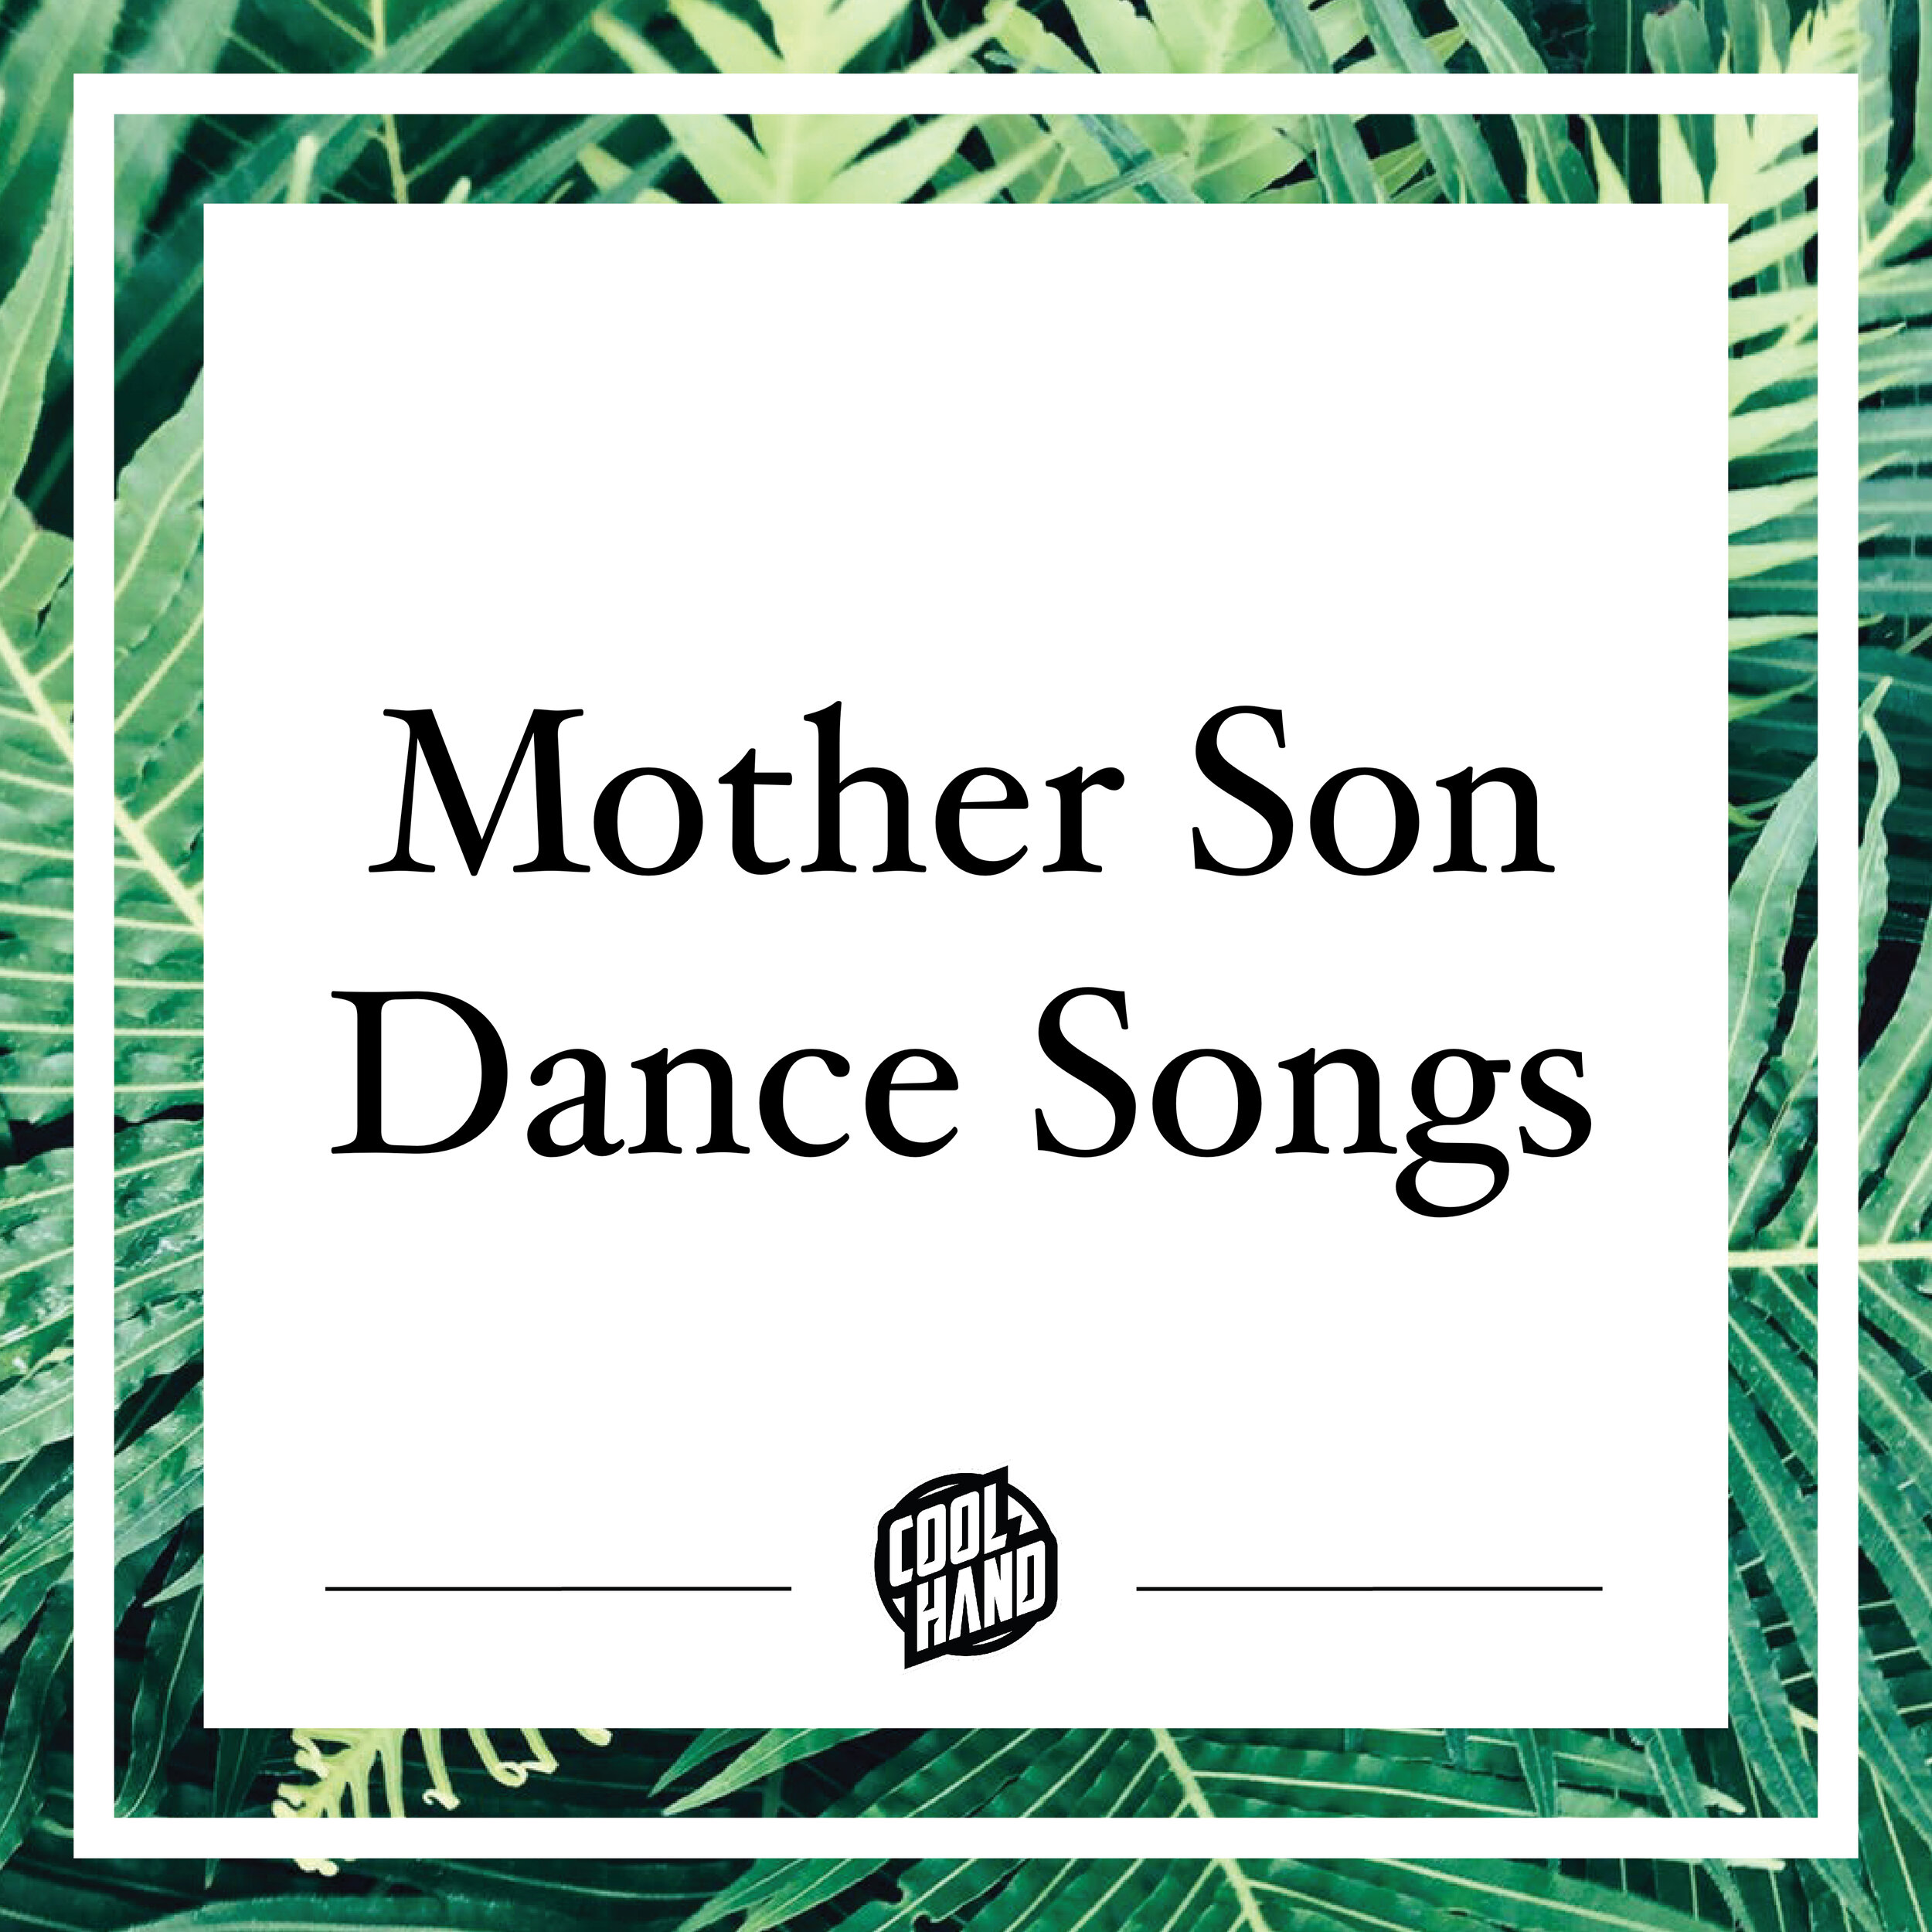 slow wedding songs for mother and son